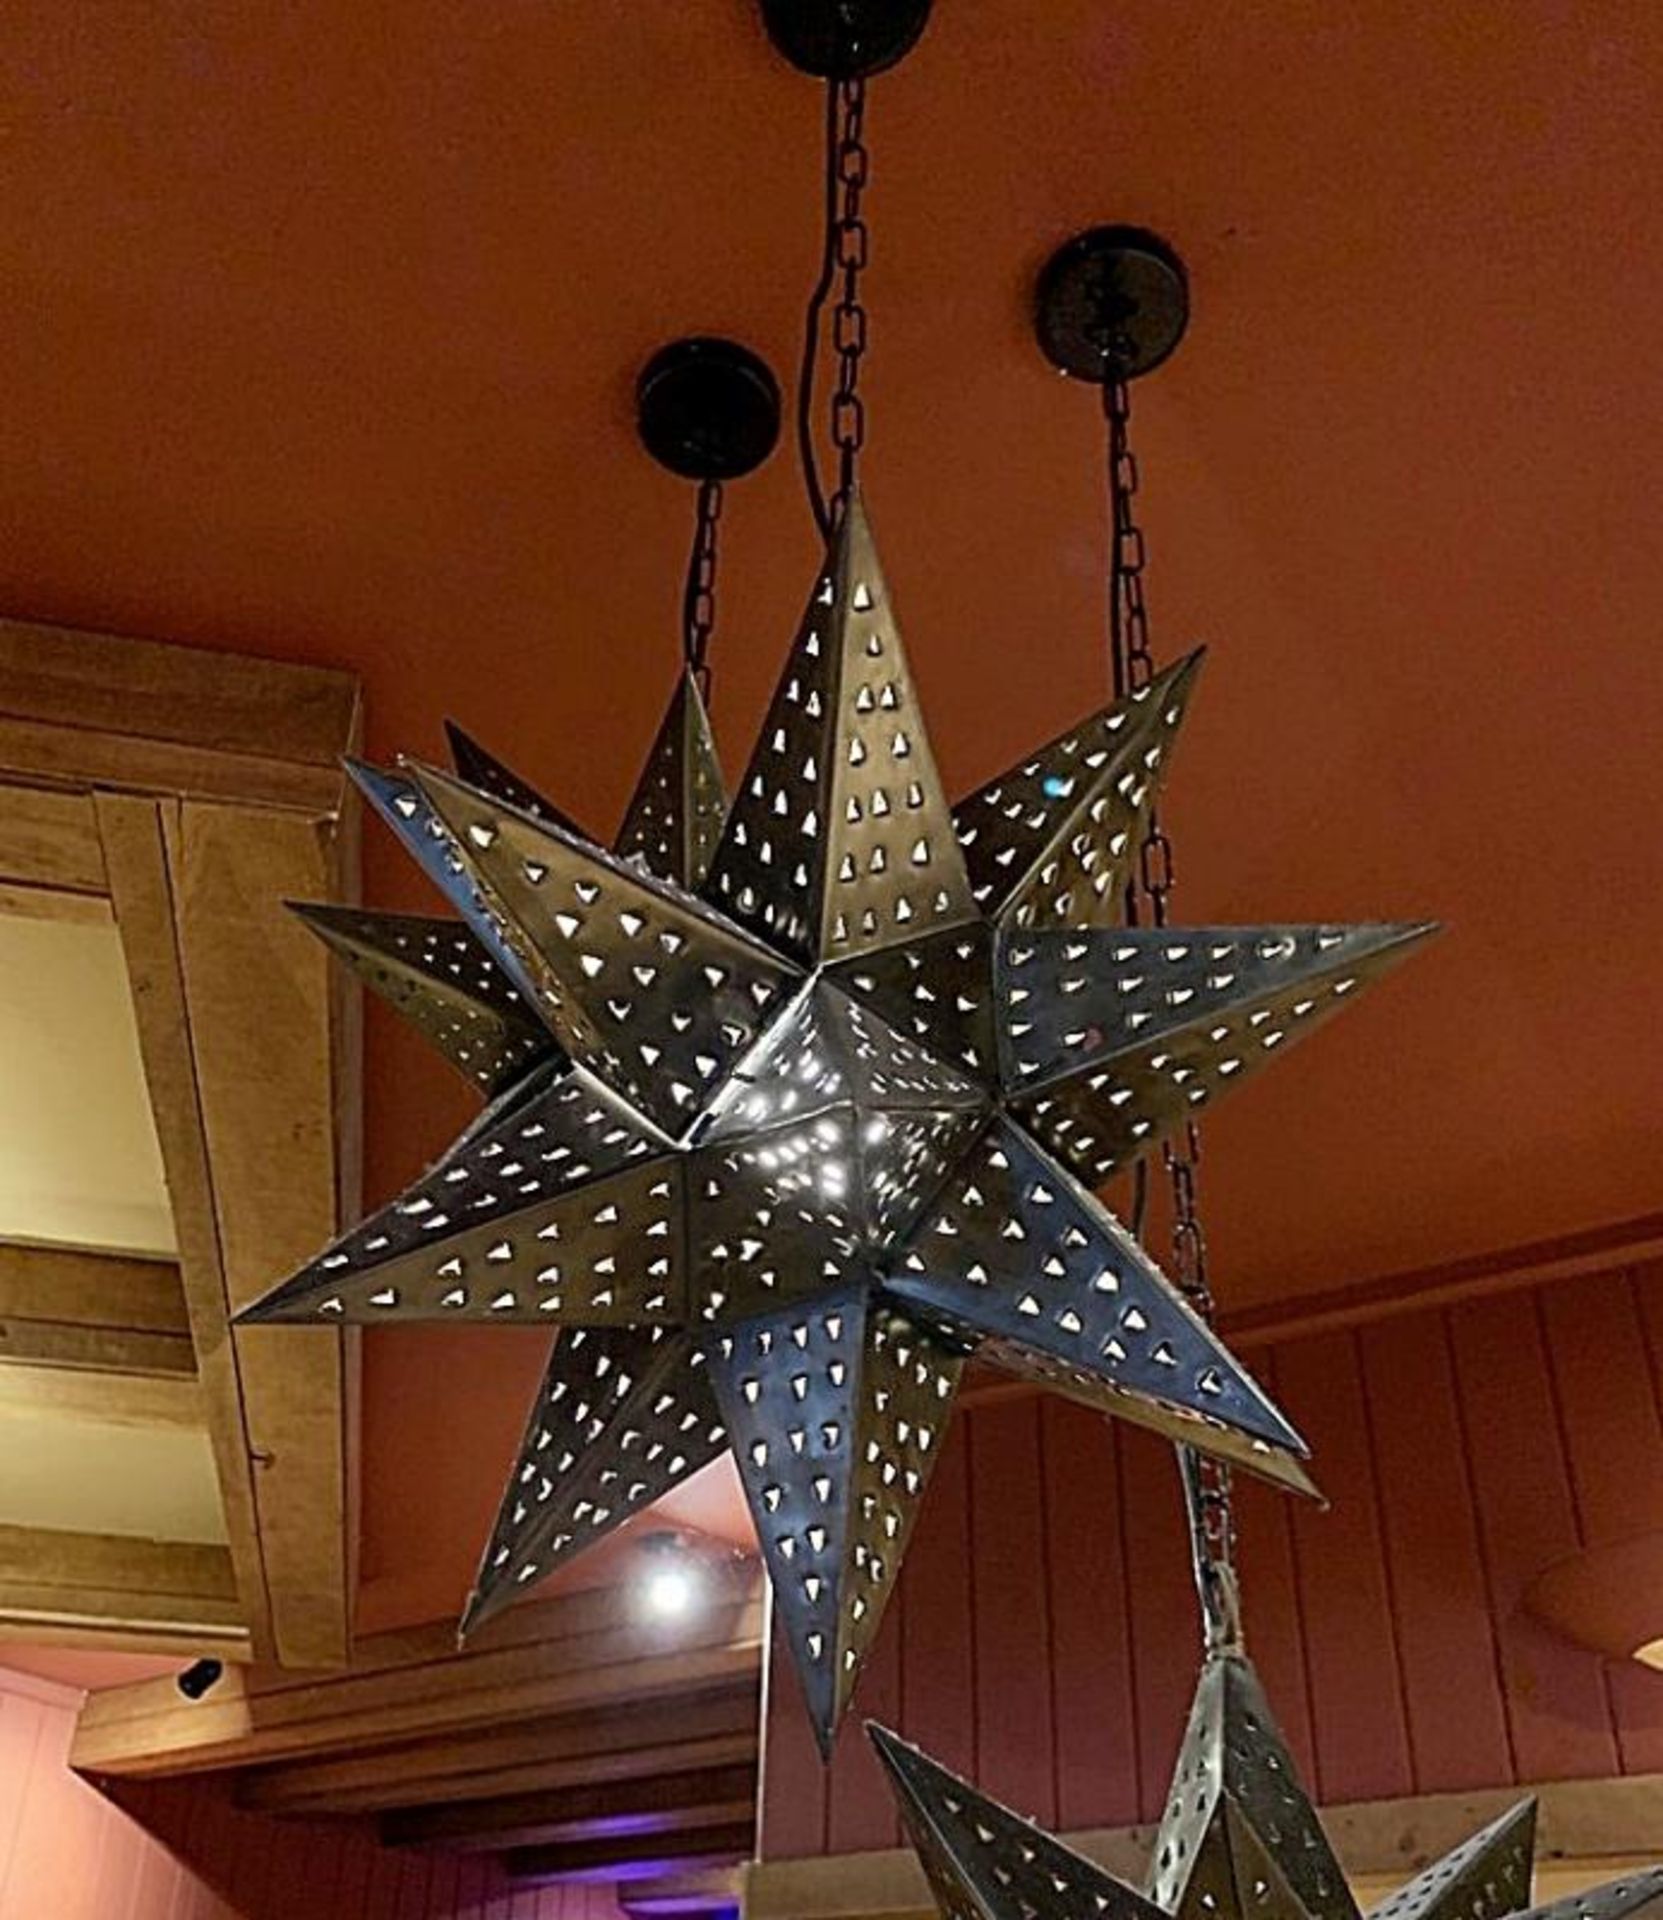 3 x Artisan Perforated Metal Star Shaped Pendant Light Fittings - Approx Dimensions: 80cm Drop x - Image 3 of 3